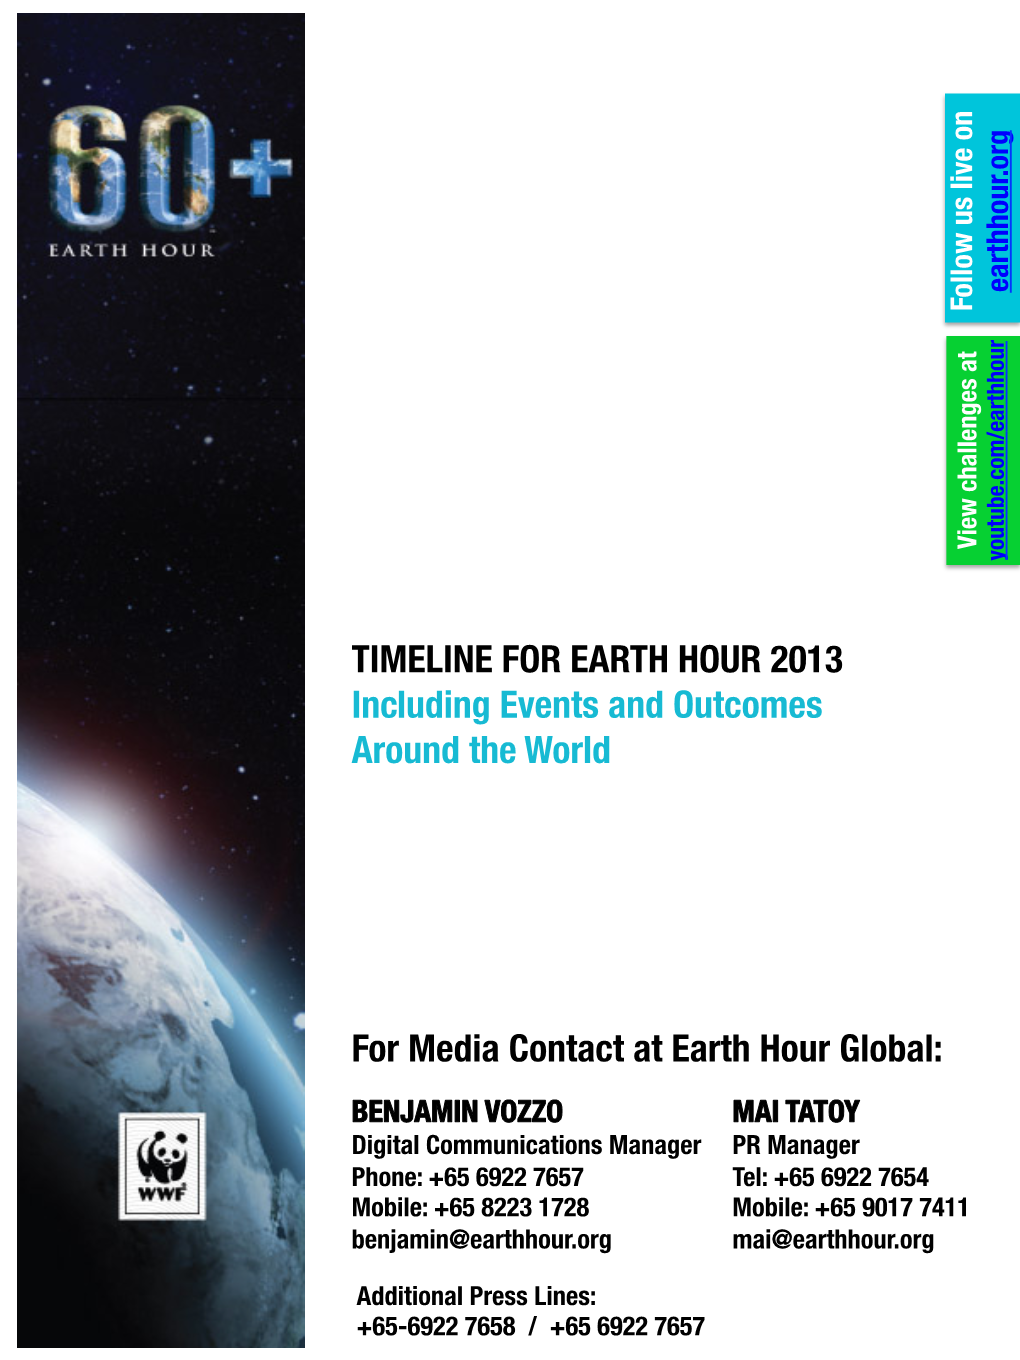 TIMELINE for EARTH HOUR 2013 Including Events and Outcomes Around the World